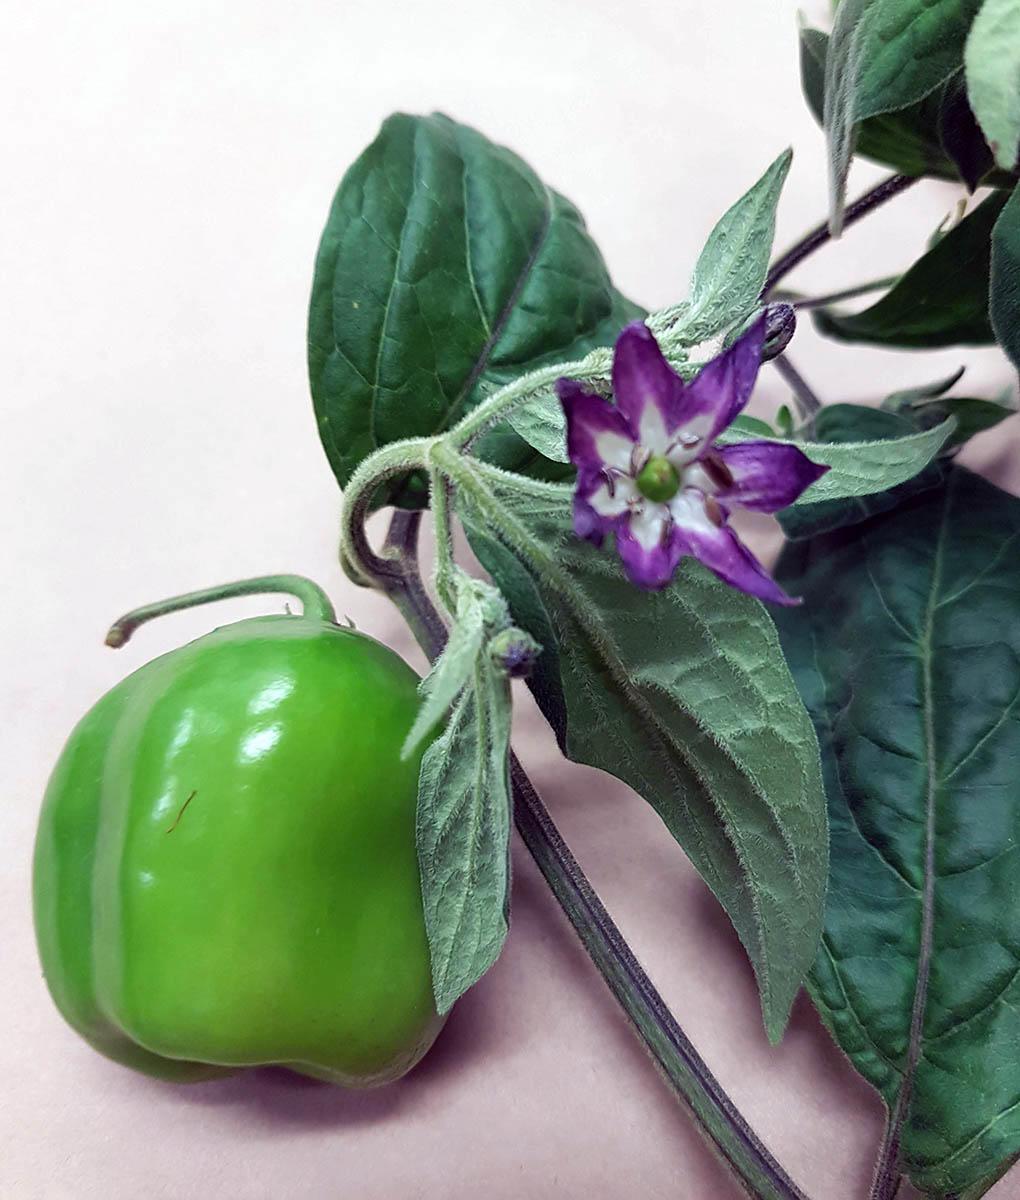 green round pepper and purple flower